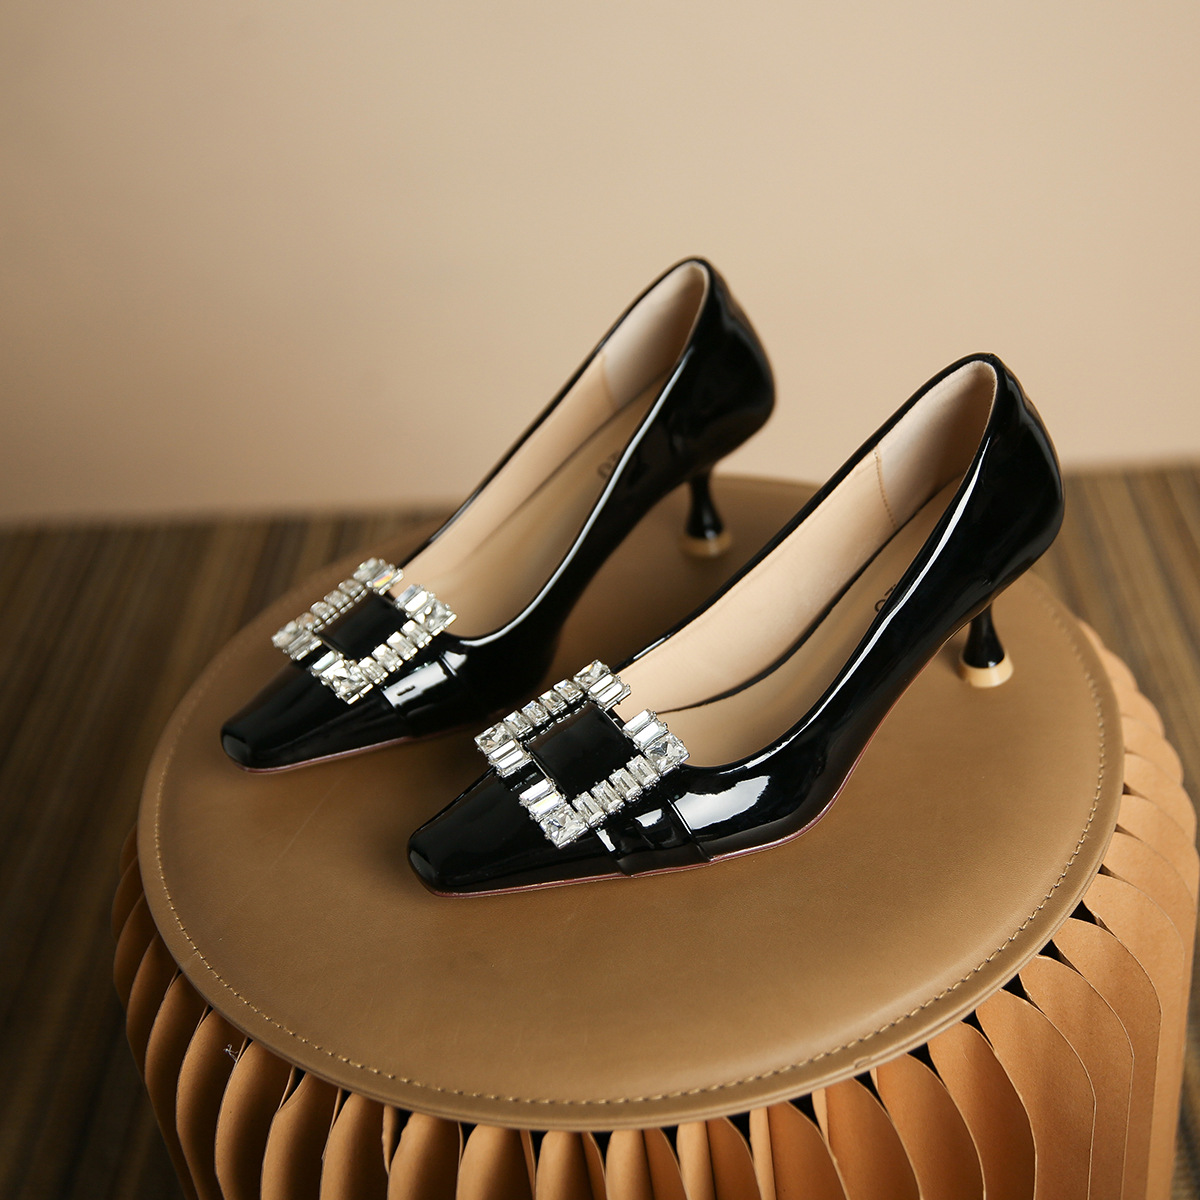 Functional and practical for active lifestyles High Heels Make a bold fashion statement